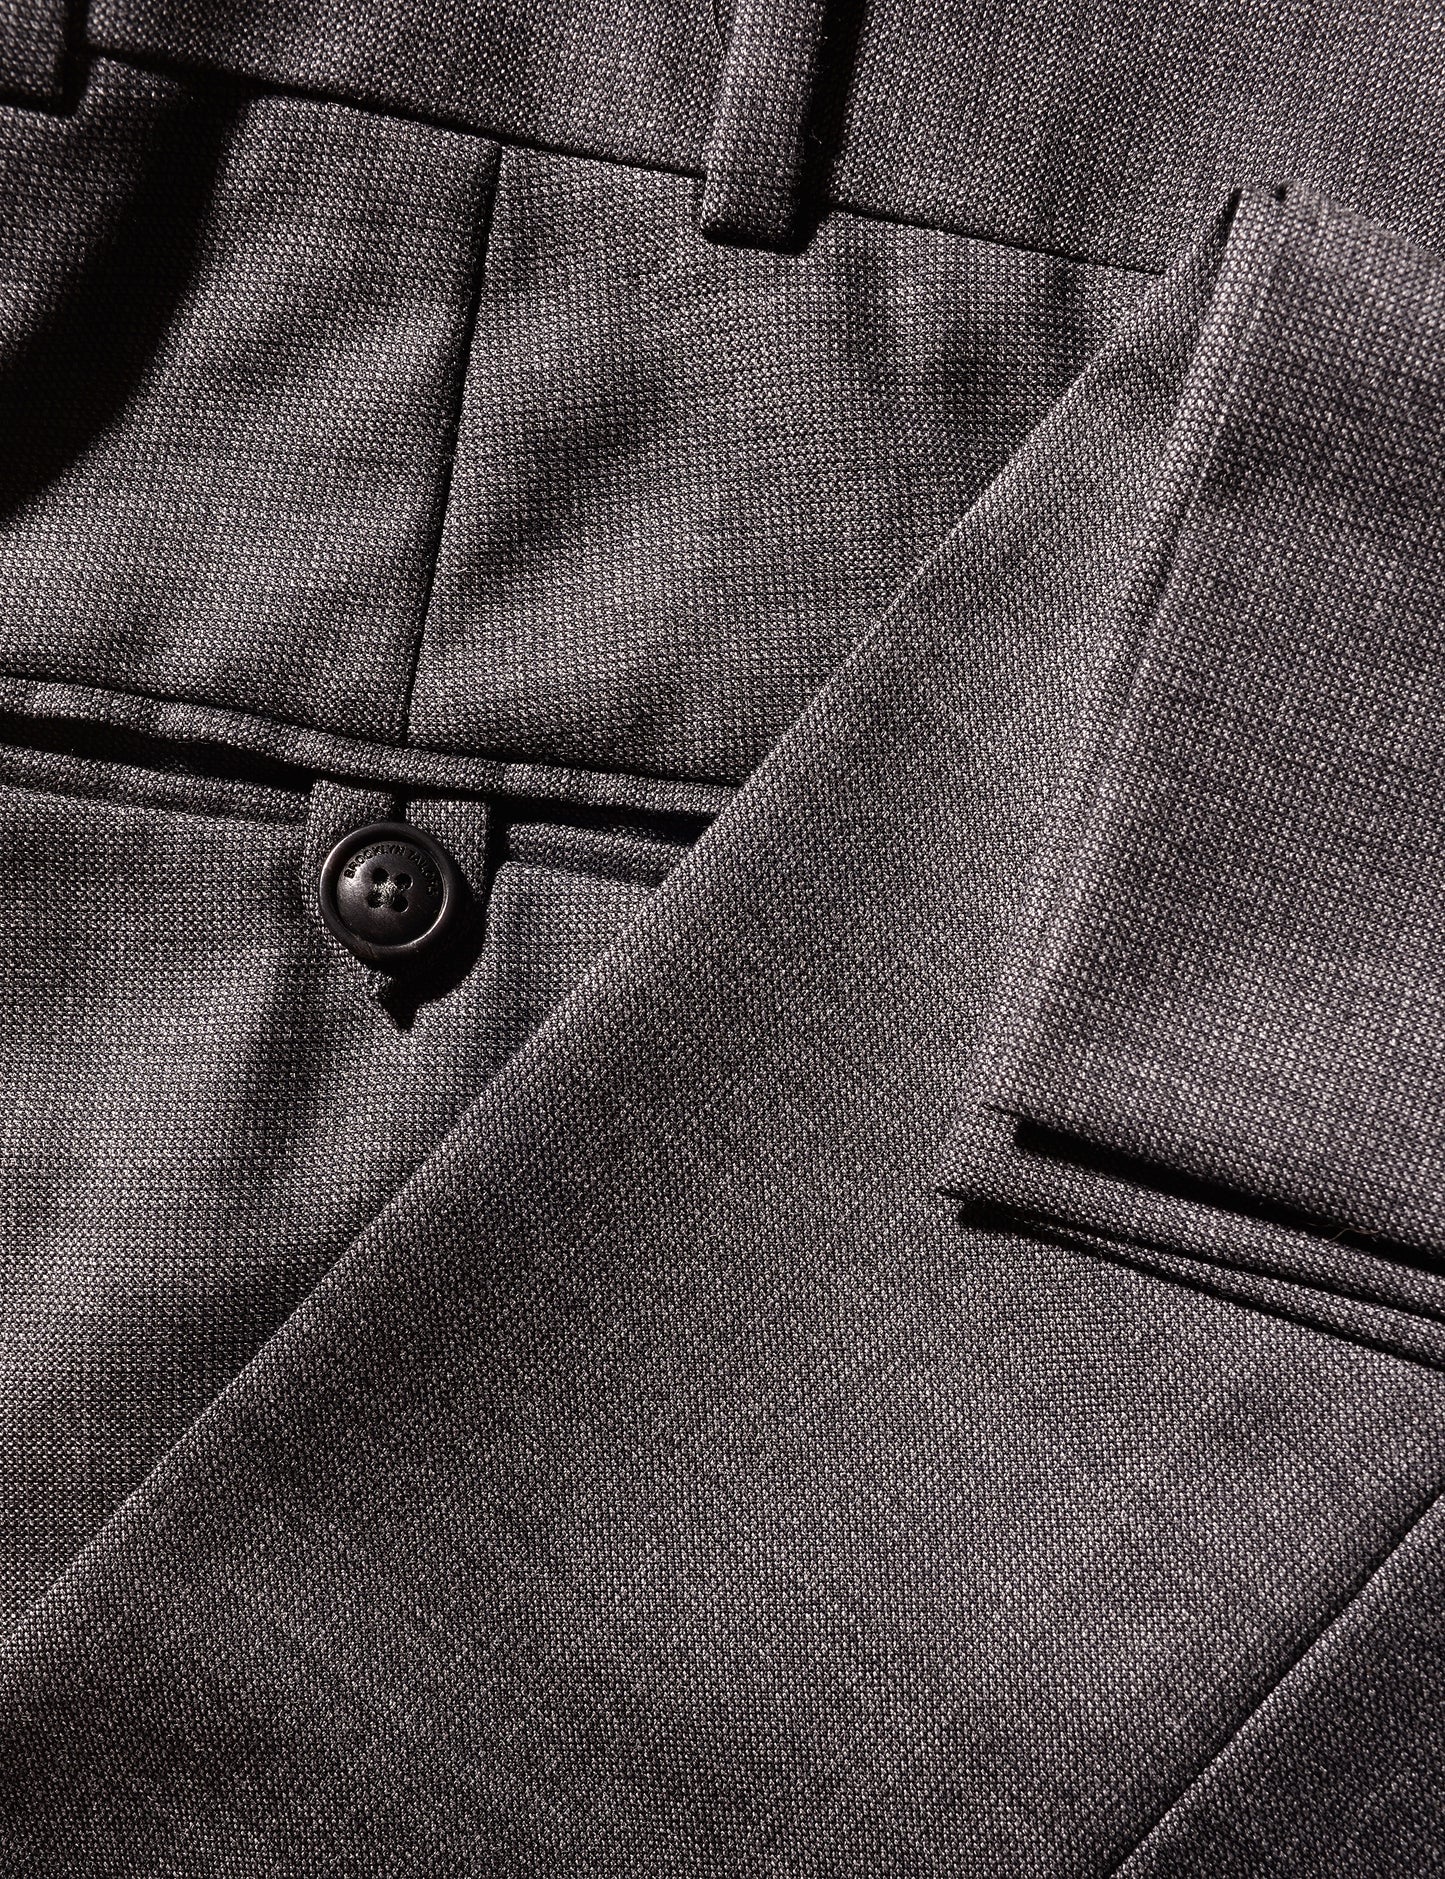 BKT50 Tailored Trousers in Wool Tickweave - Deep Gray